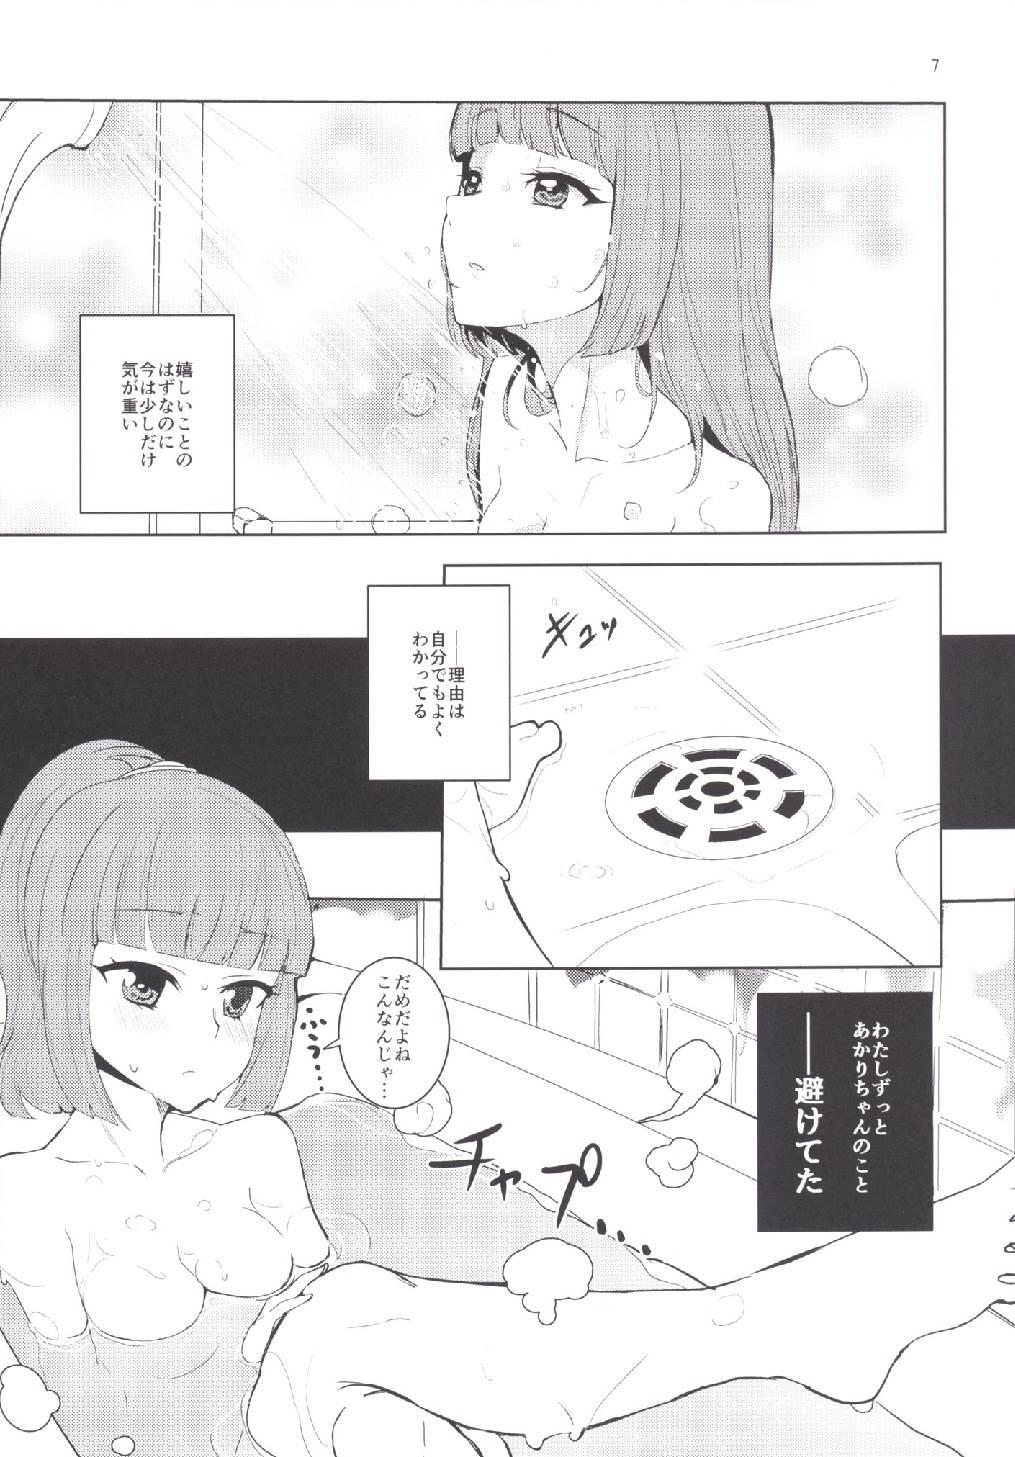 Real Amateur Porn Still in love - Aikatsu Pounded - Page 7